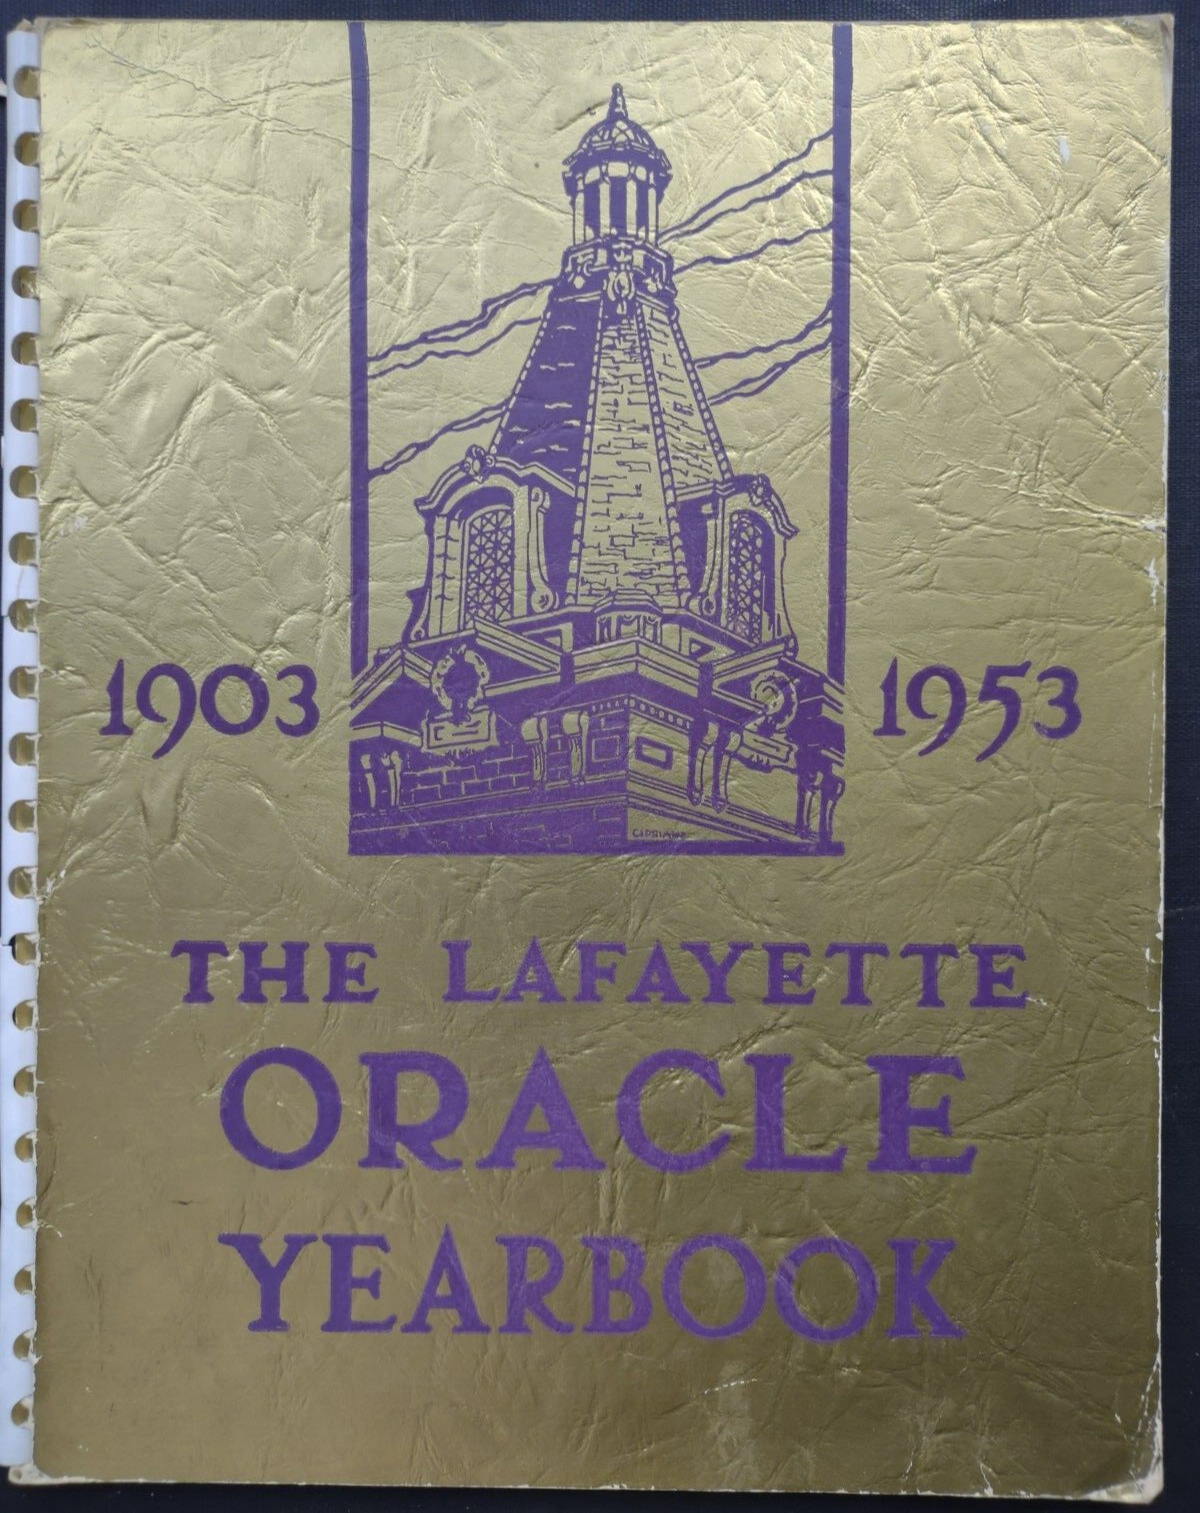 1953 Lafayette High School Buffalo NY Yearbook - ORACLE 1903 -1953 Anniversary